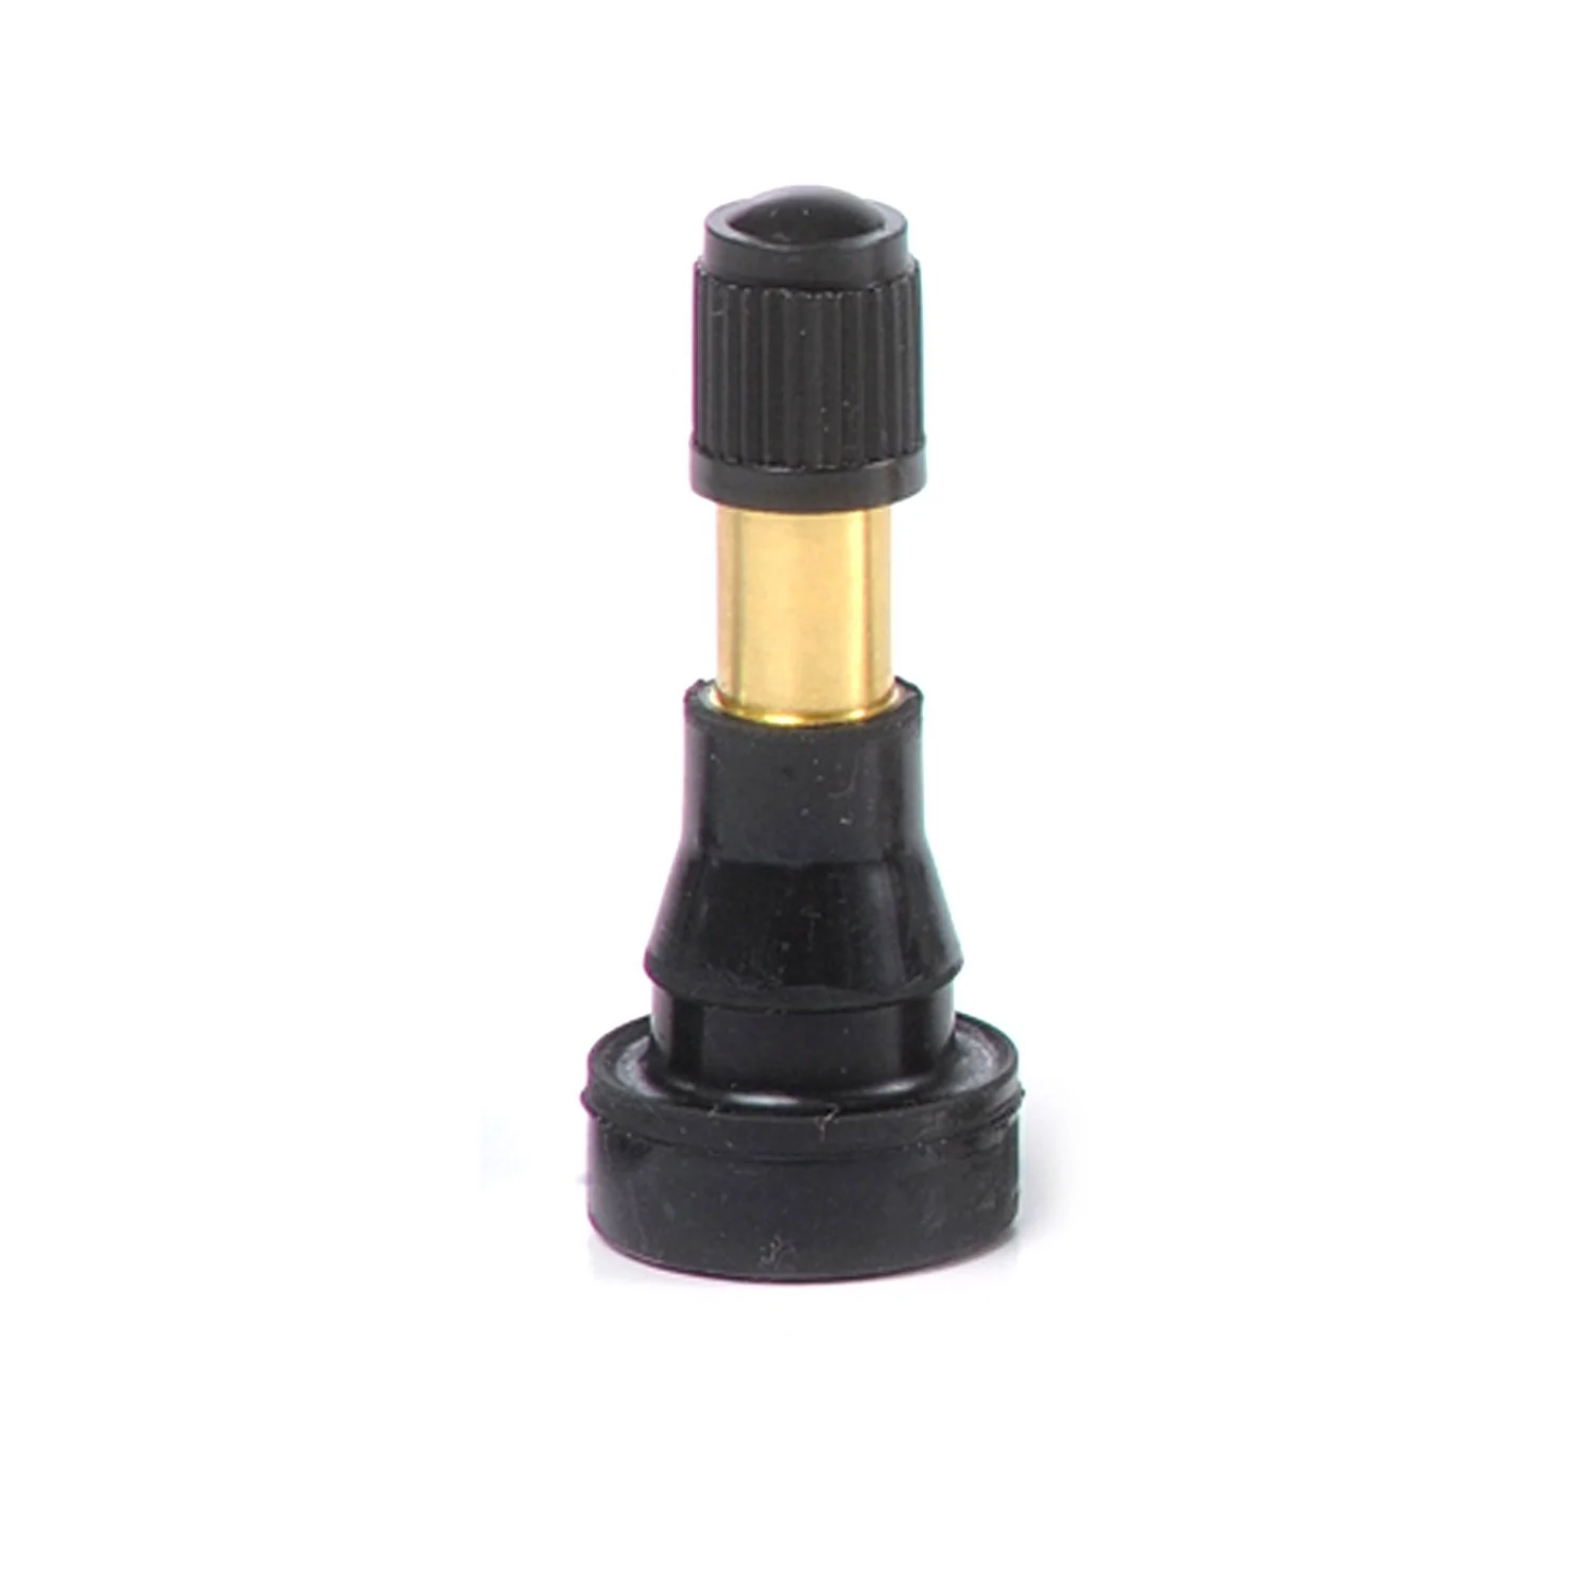 600 High Pressure Rubber Snap-in Tubless Tire Valve Stems, For 0.453" Valve Stem Hole | TR600HP